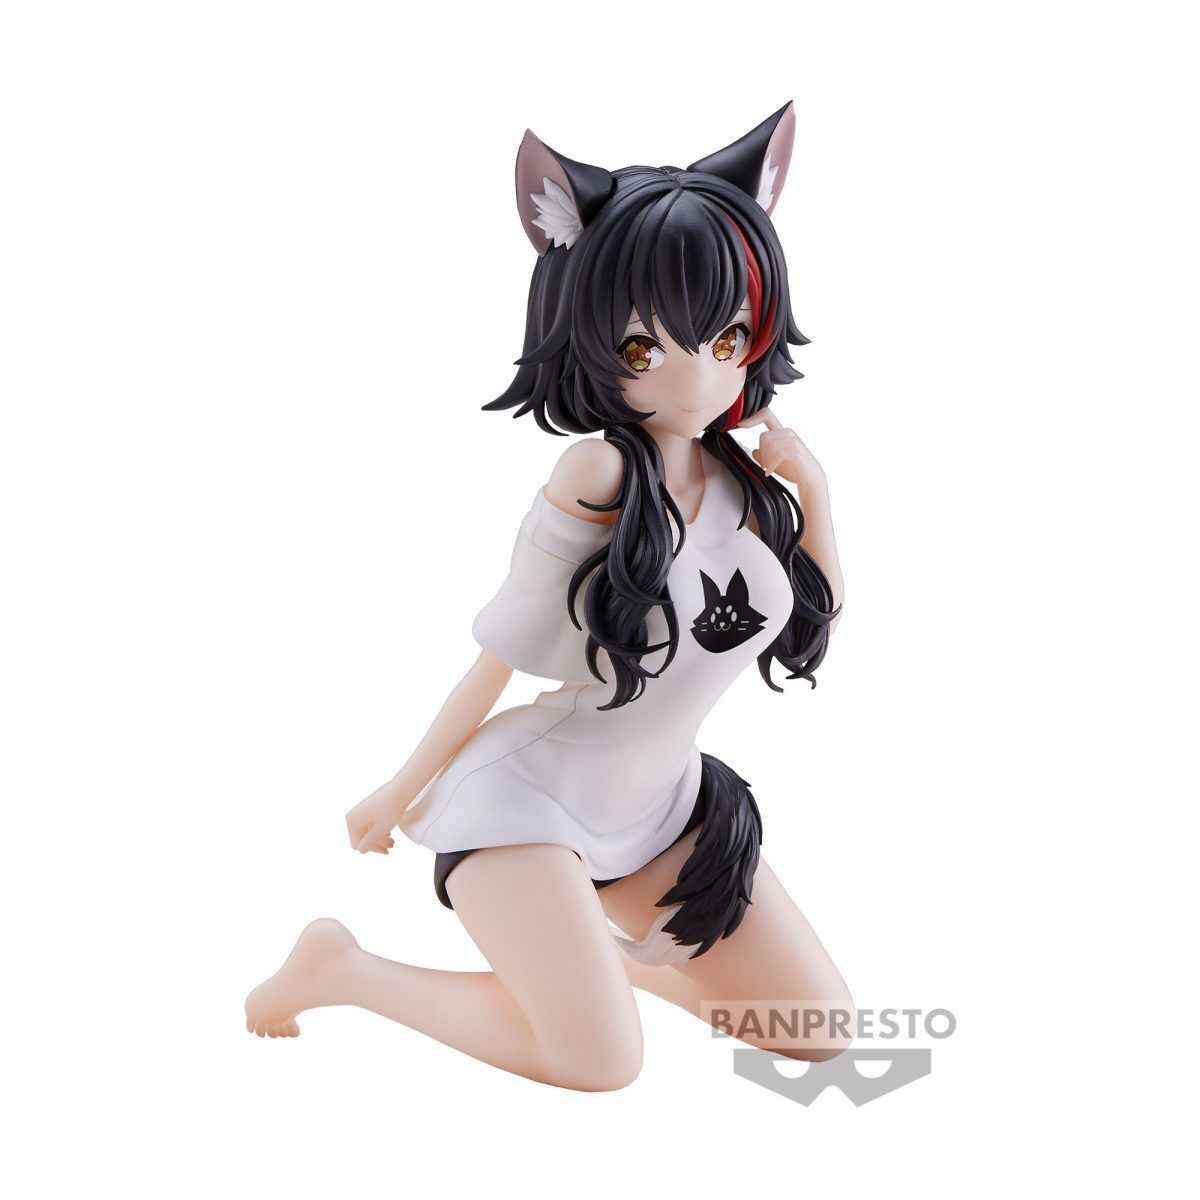 Hololive #Hololive If -Relax Time-Ookami Mio Banpresto